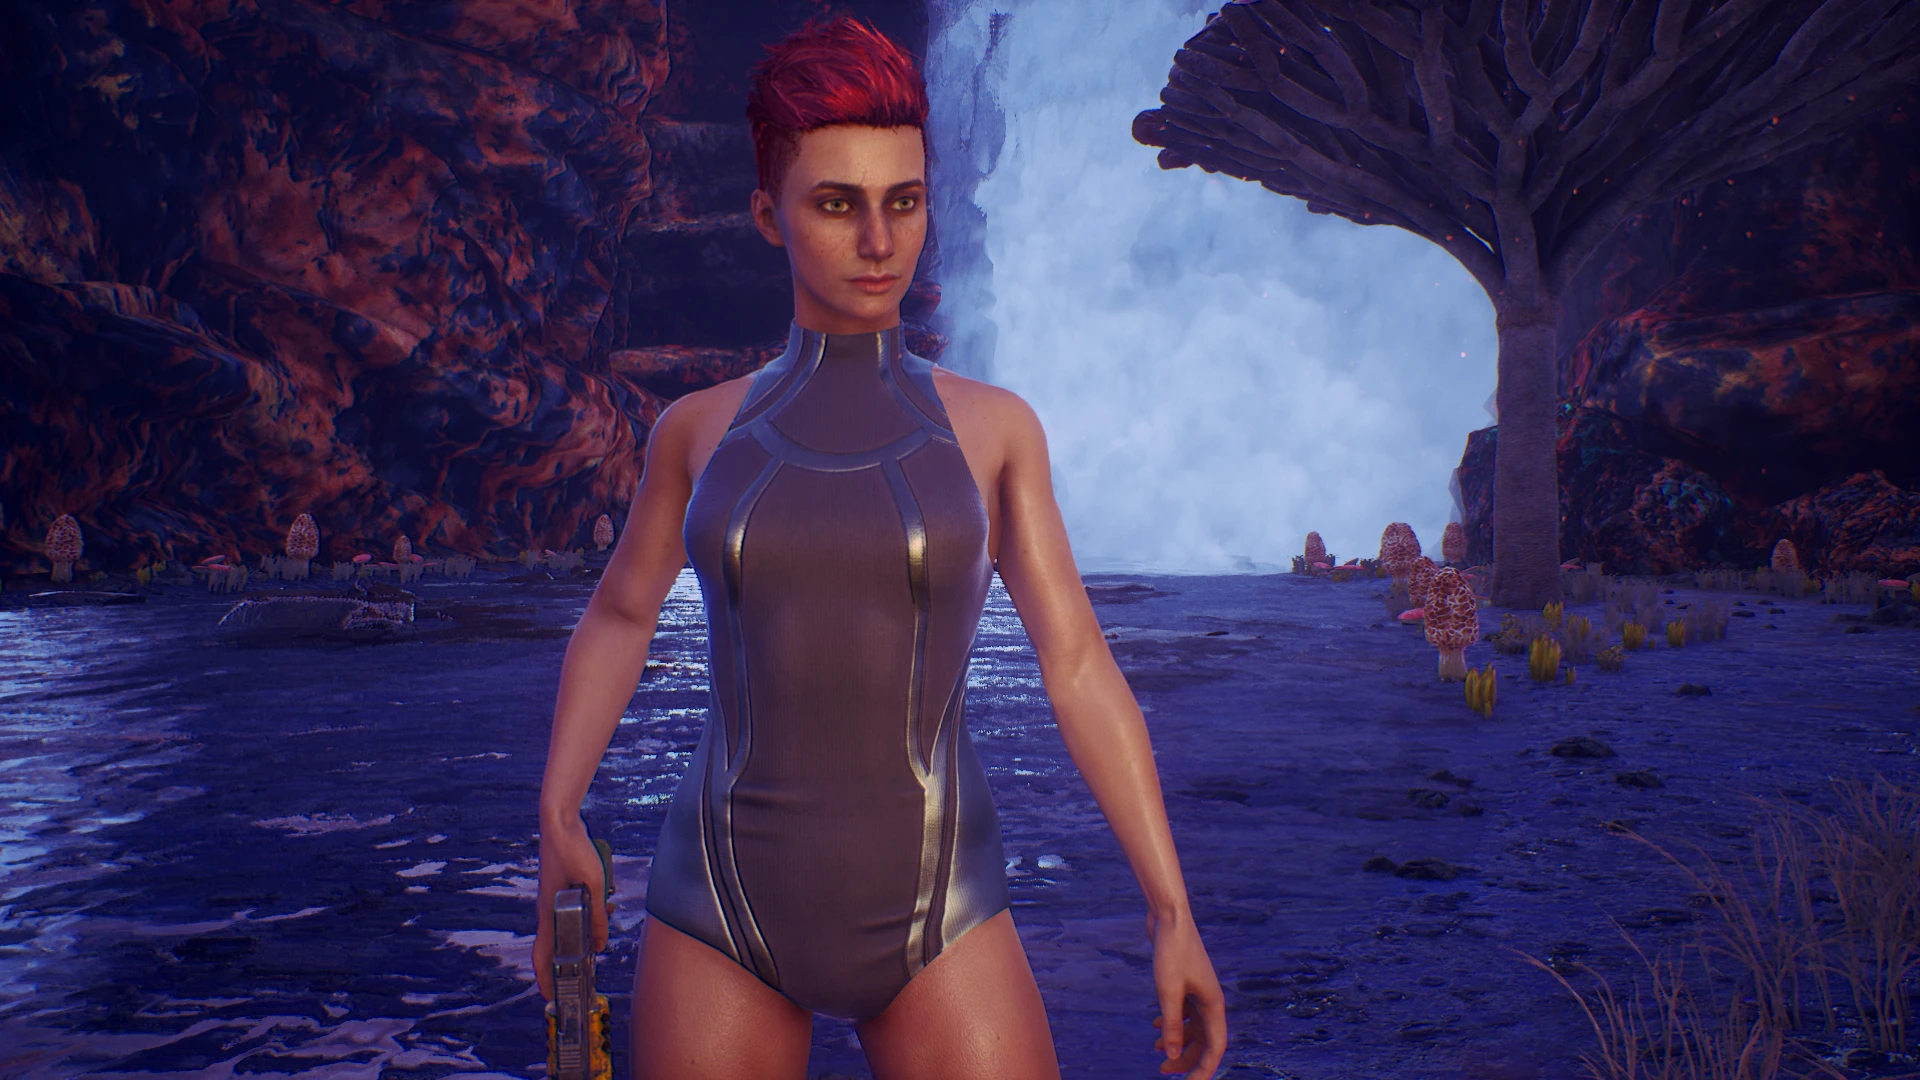 ᐈ The Outer Worlds: Mods Guide • WePlay!